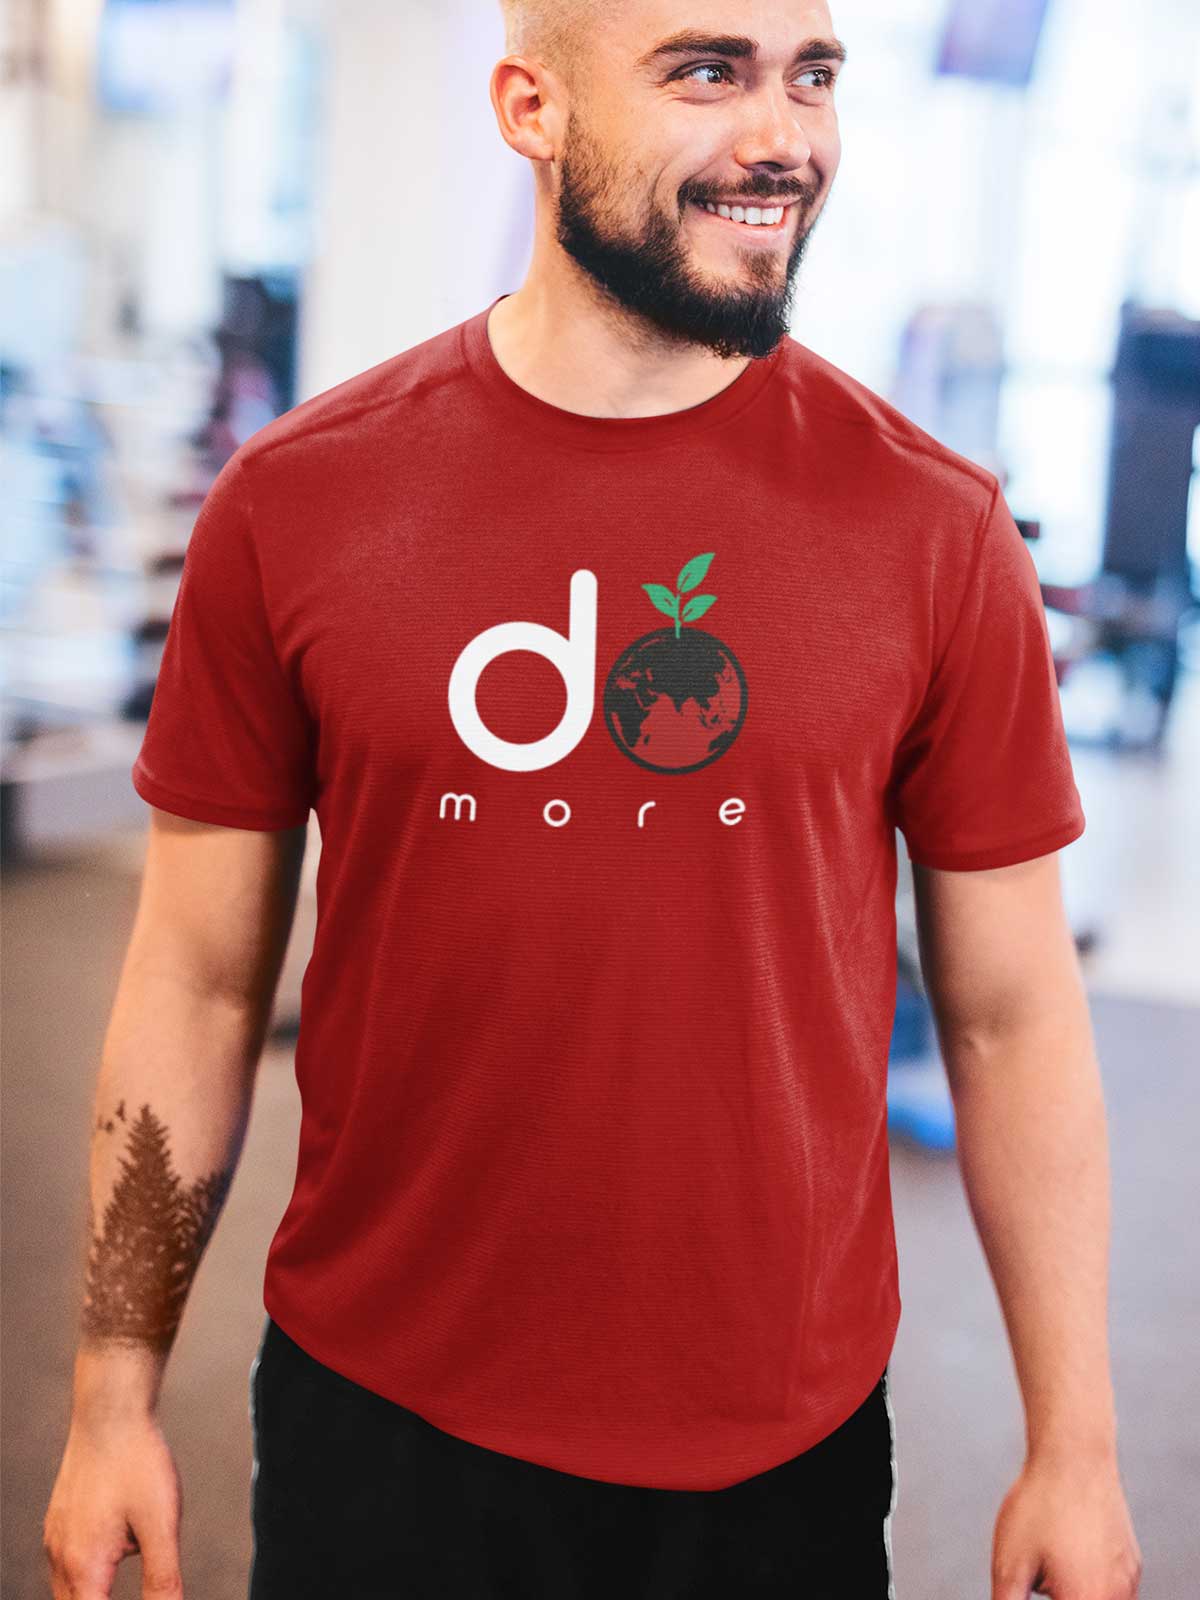 Do-more-printed-t-shirt-for-men by Ghumakkad